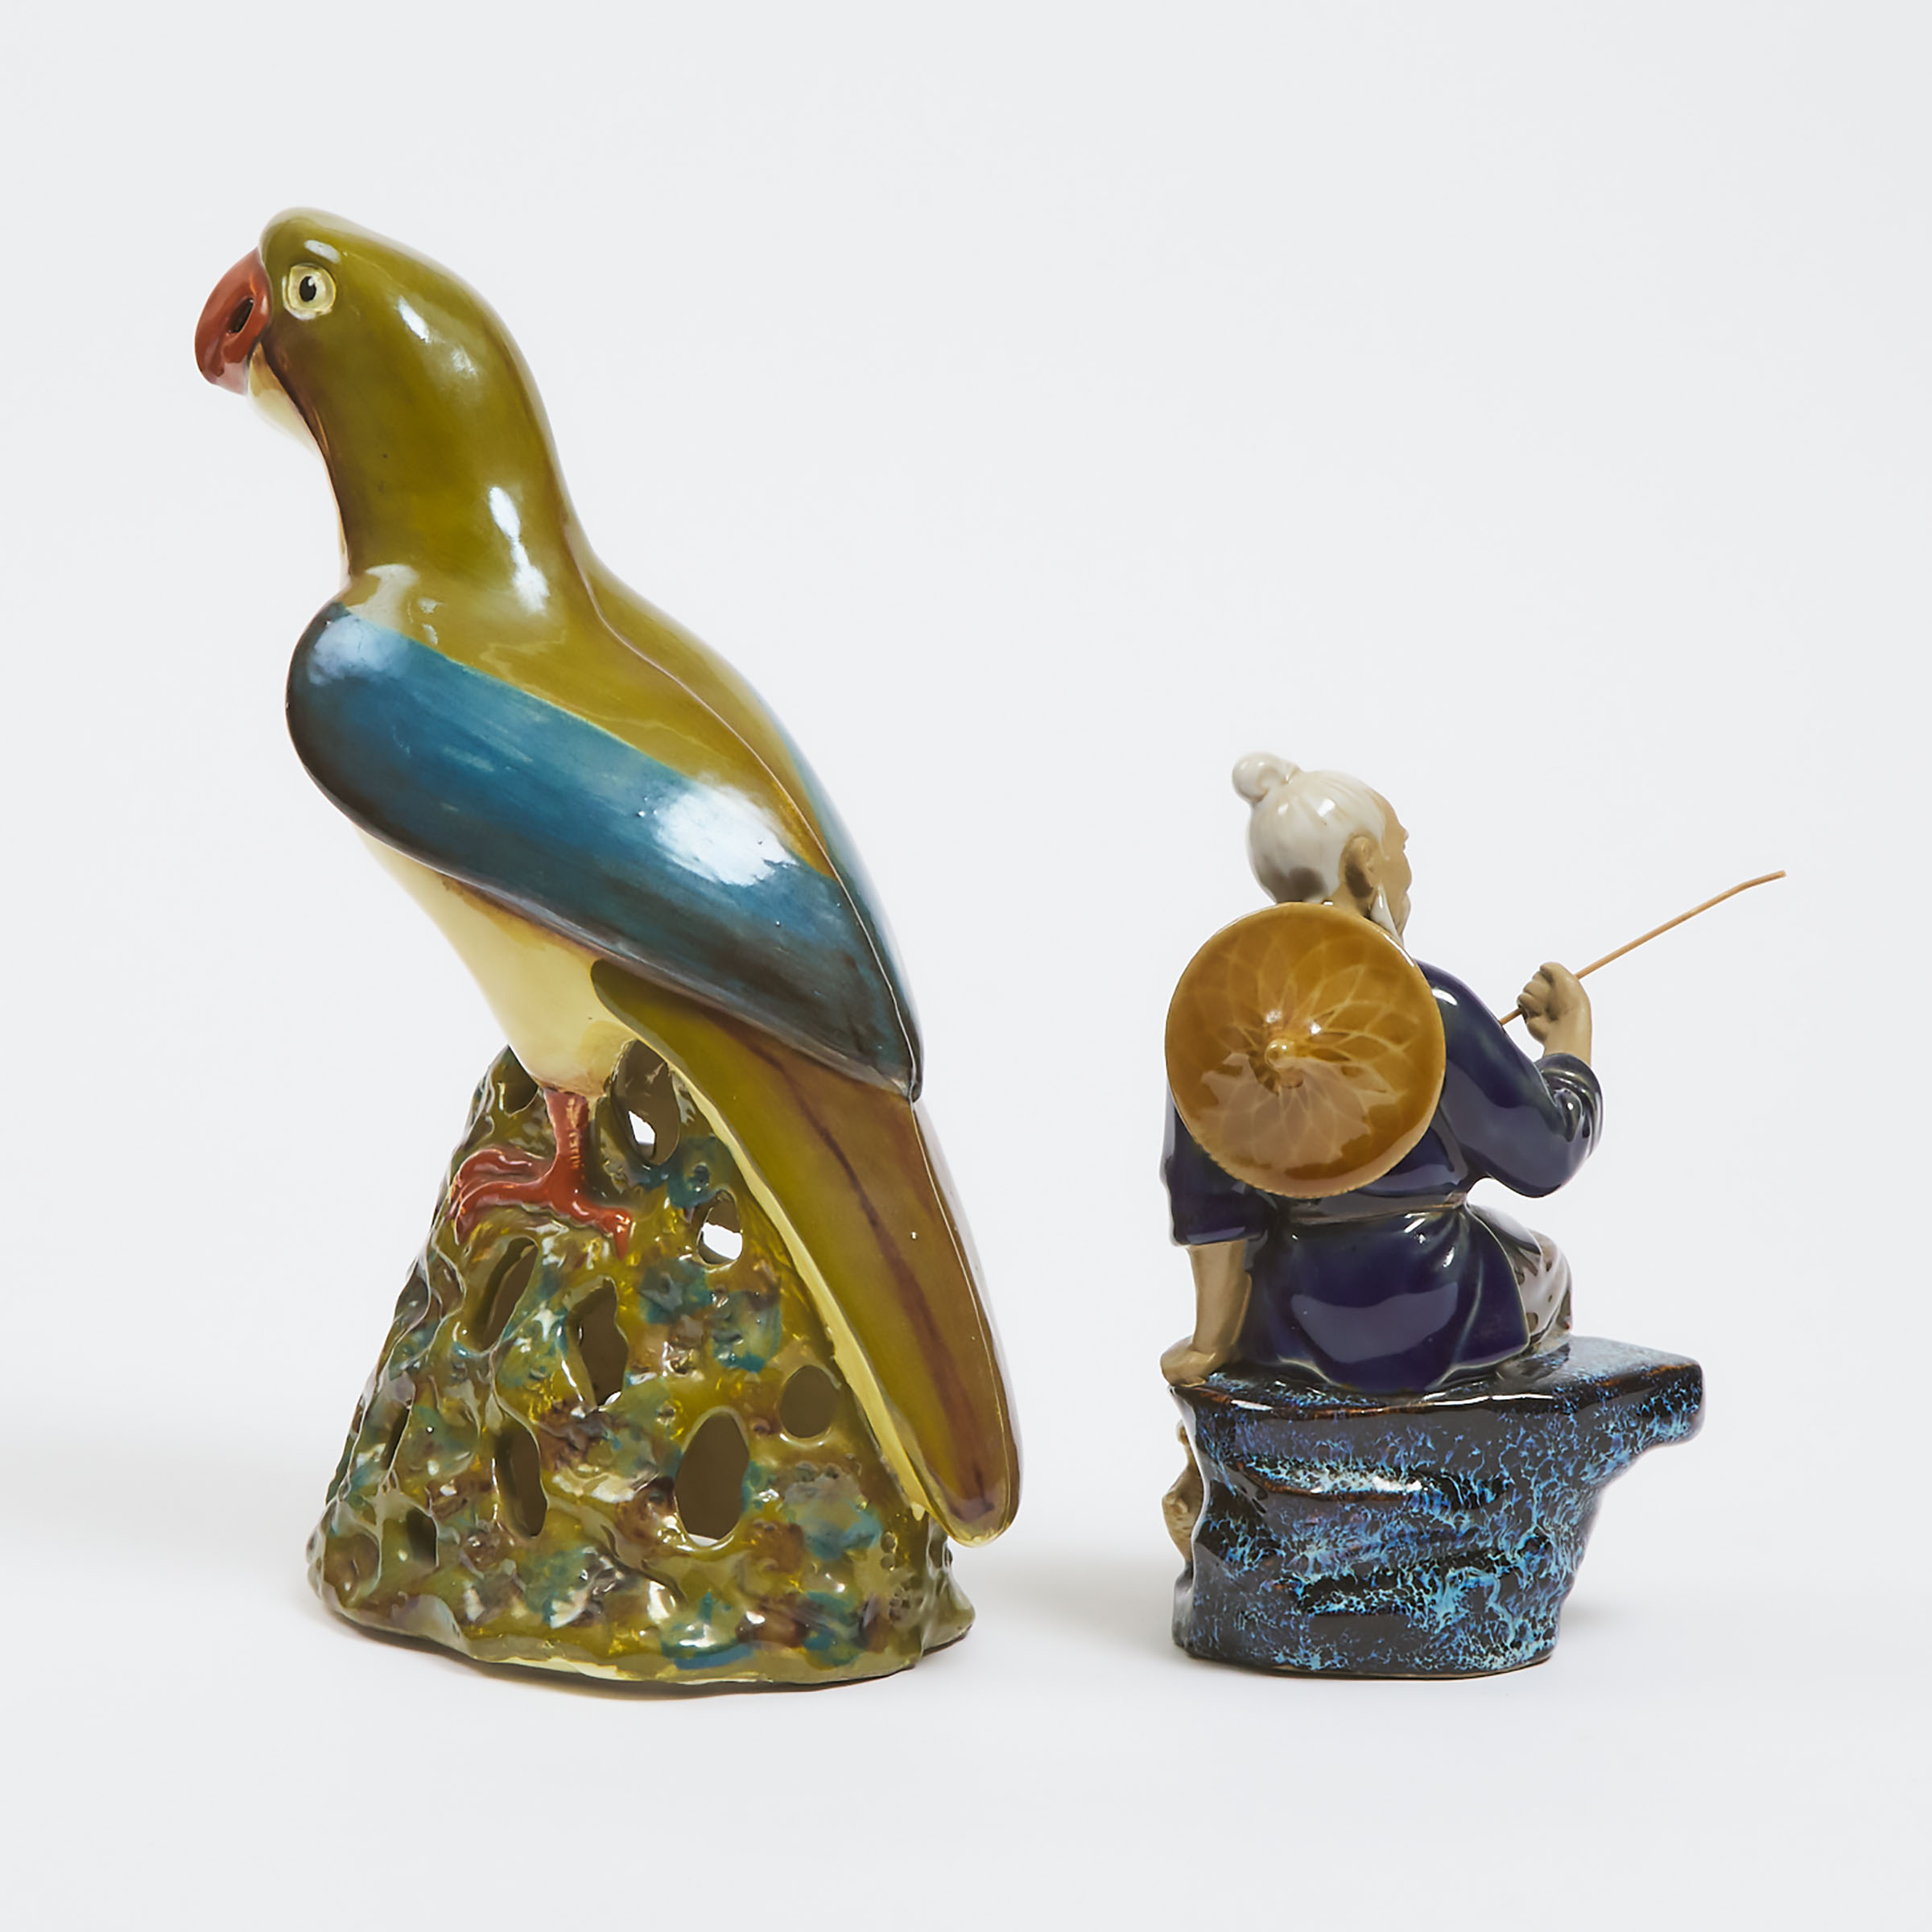 A Shiwan Pottery Figure of a Fisherman, Together With a Polychrome Glazed Parrot, Early to Mid 20th Century 